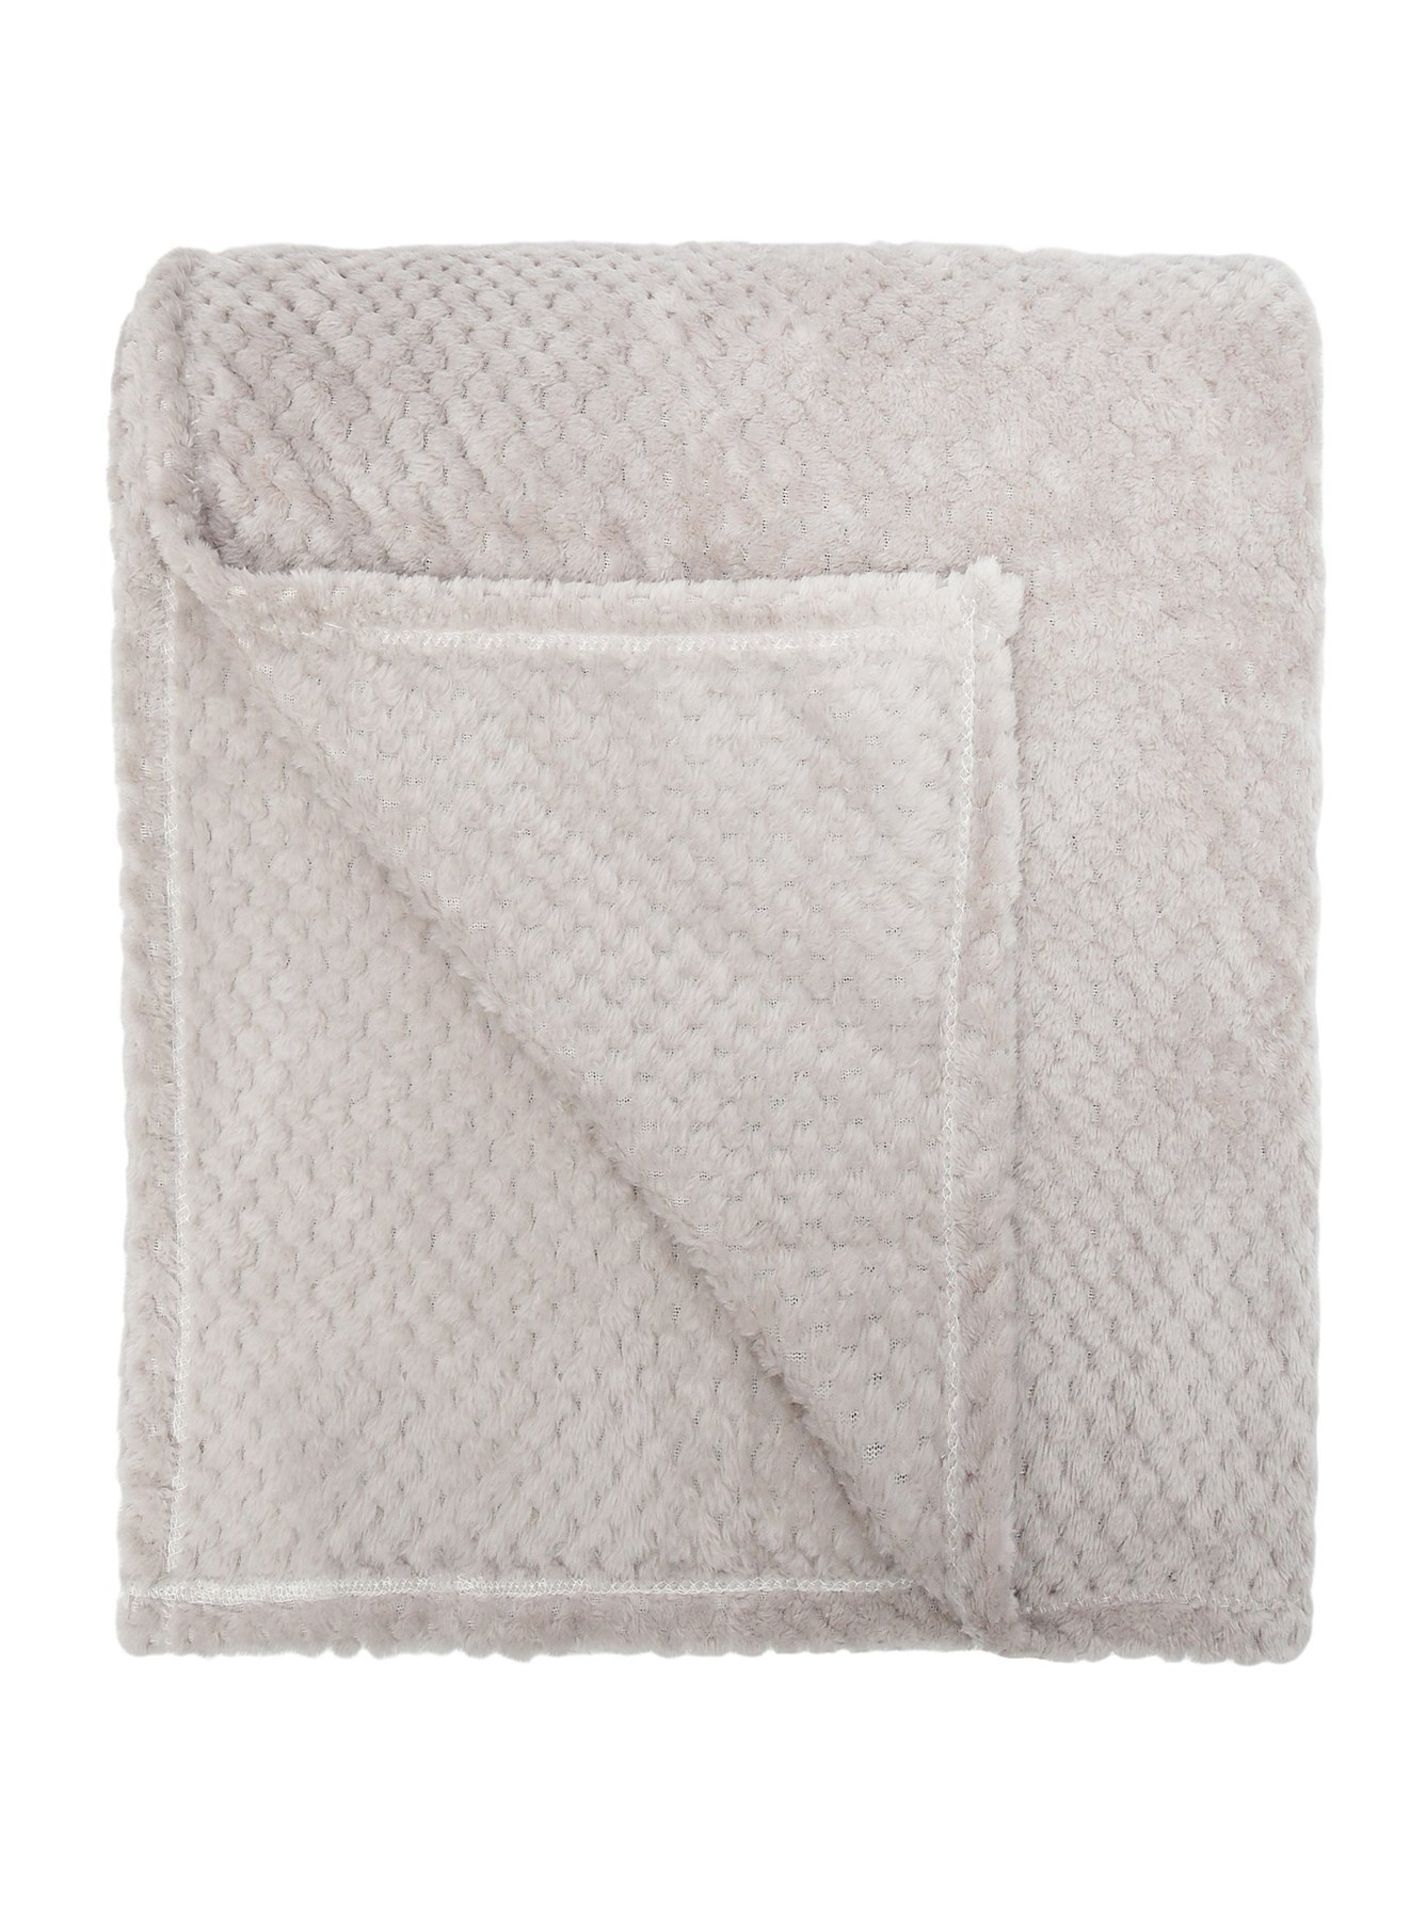 16x NEW & PACKAGED SLEEPDOWN Cosy Collection Soft Touch Waffle Fleece Throw 130 x 160cm - NATURAL. - Image 4 of 4